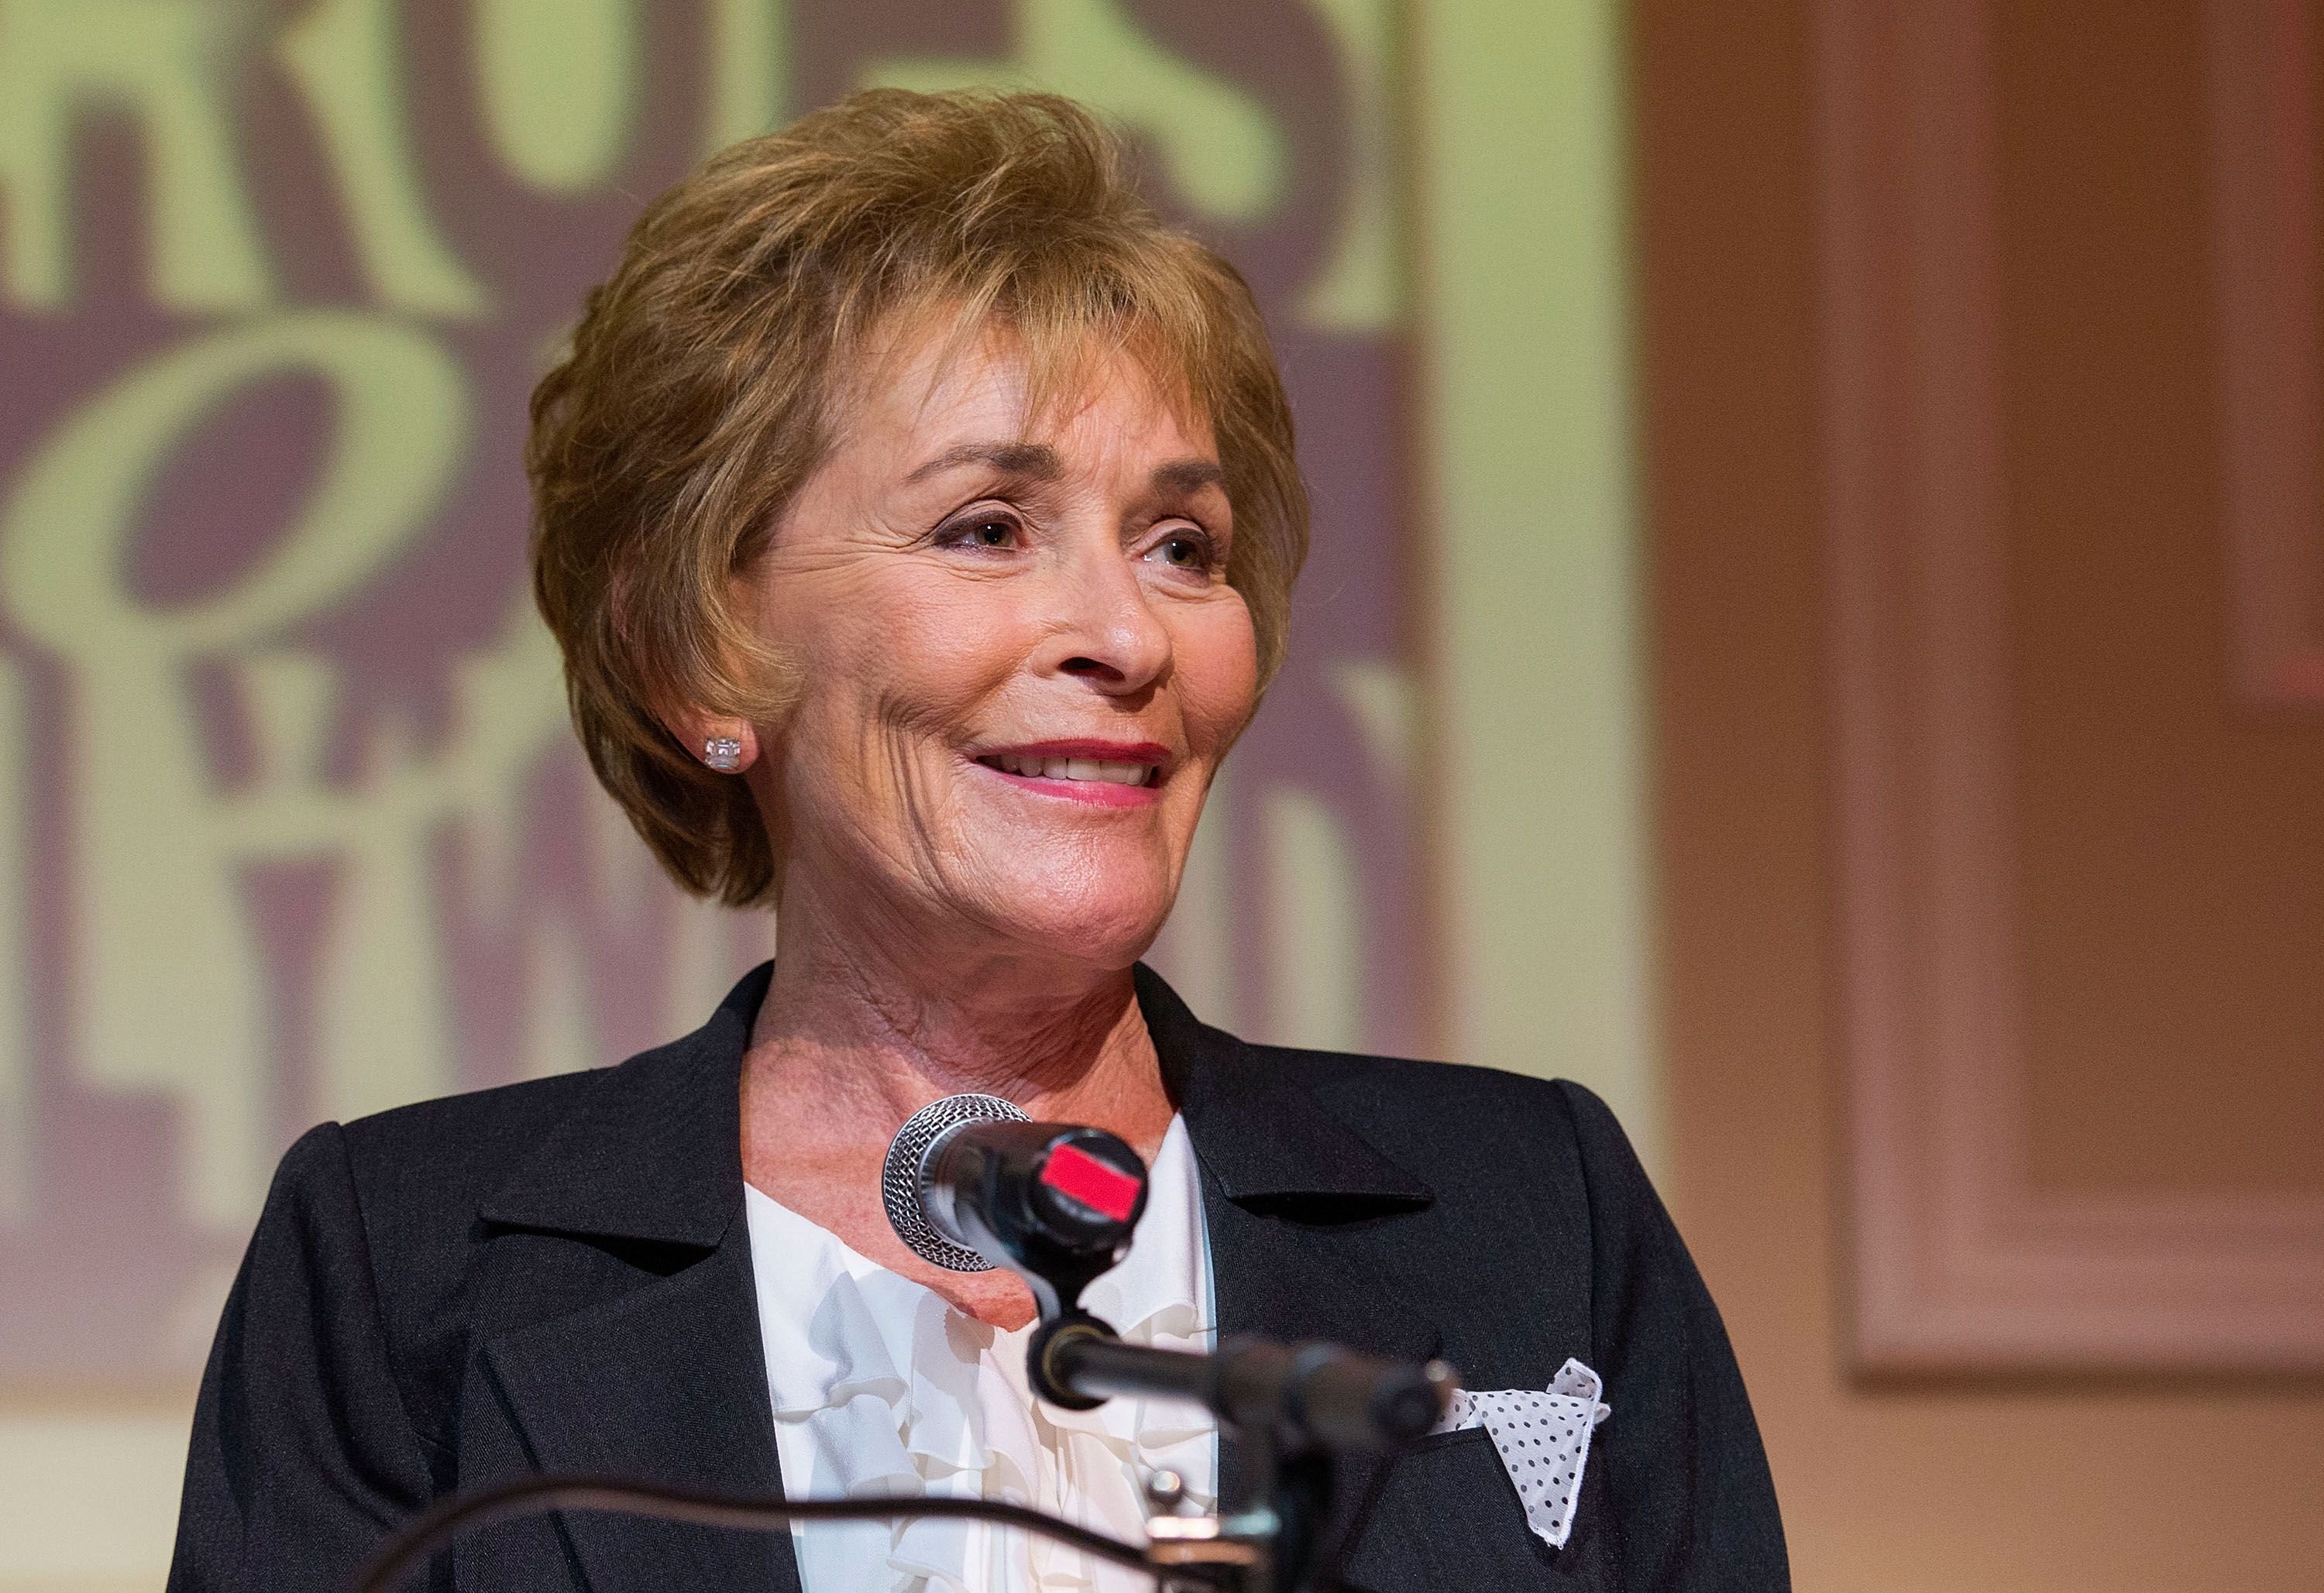 Judge Judy Sheindlin at the Heroes Of Hollywood Luncheon at Taglyan Cultural Complex on June 5, 2014 | Photo: Getty Images